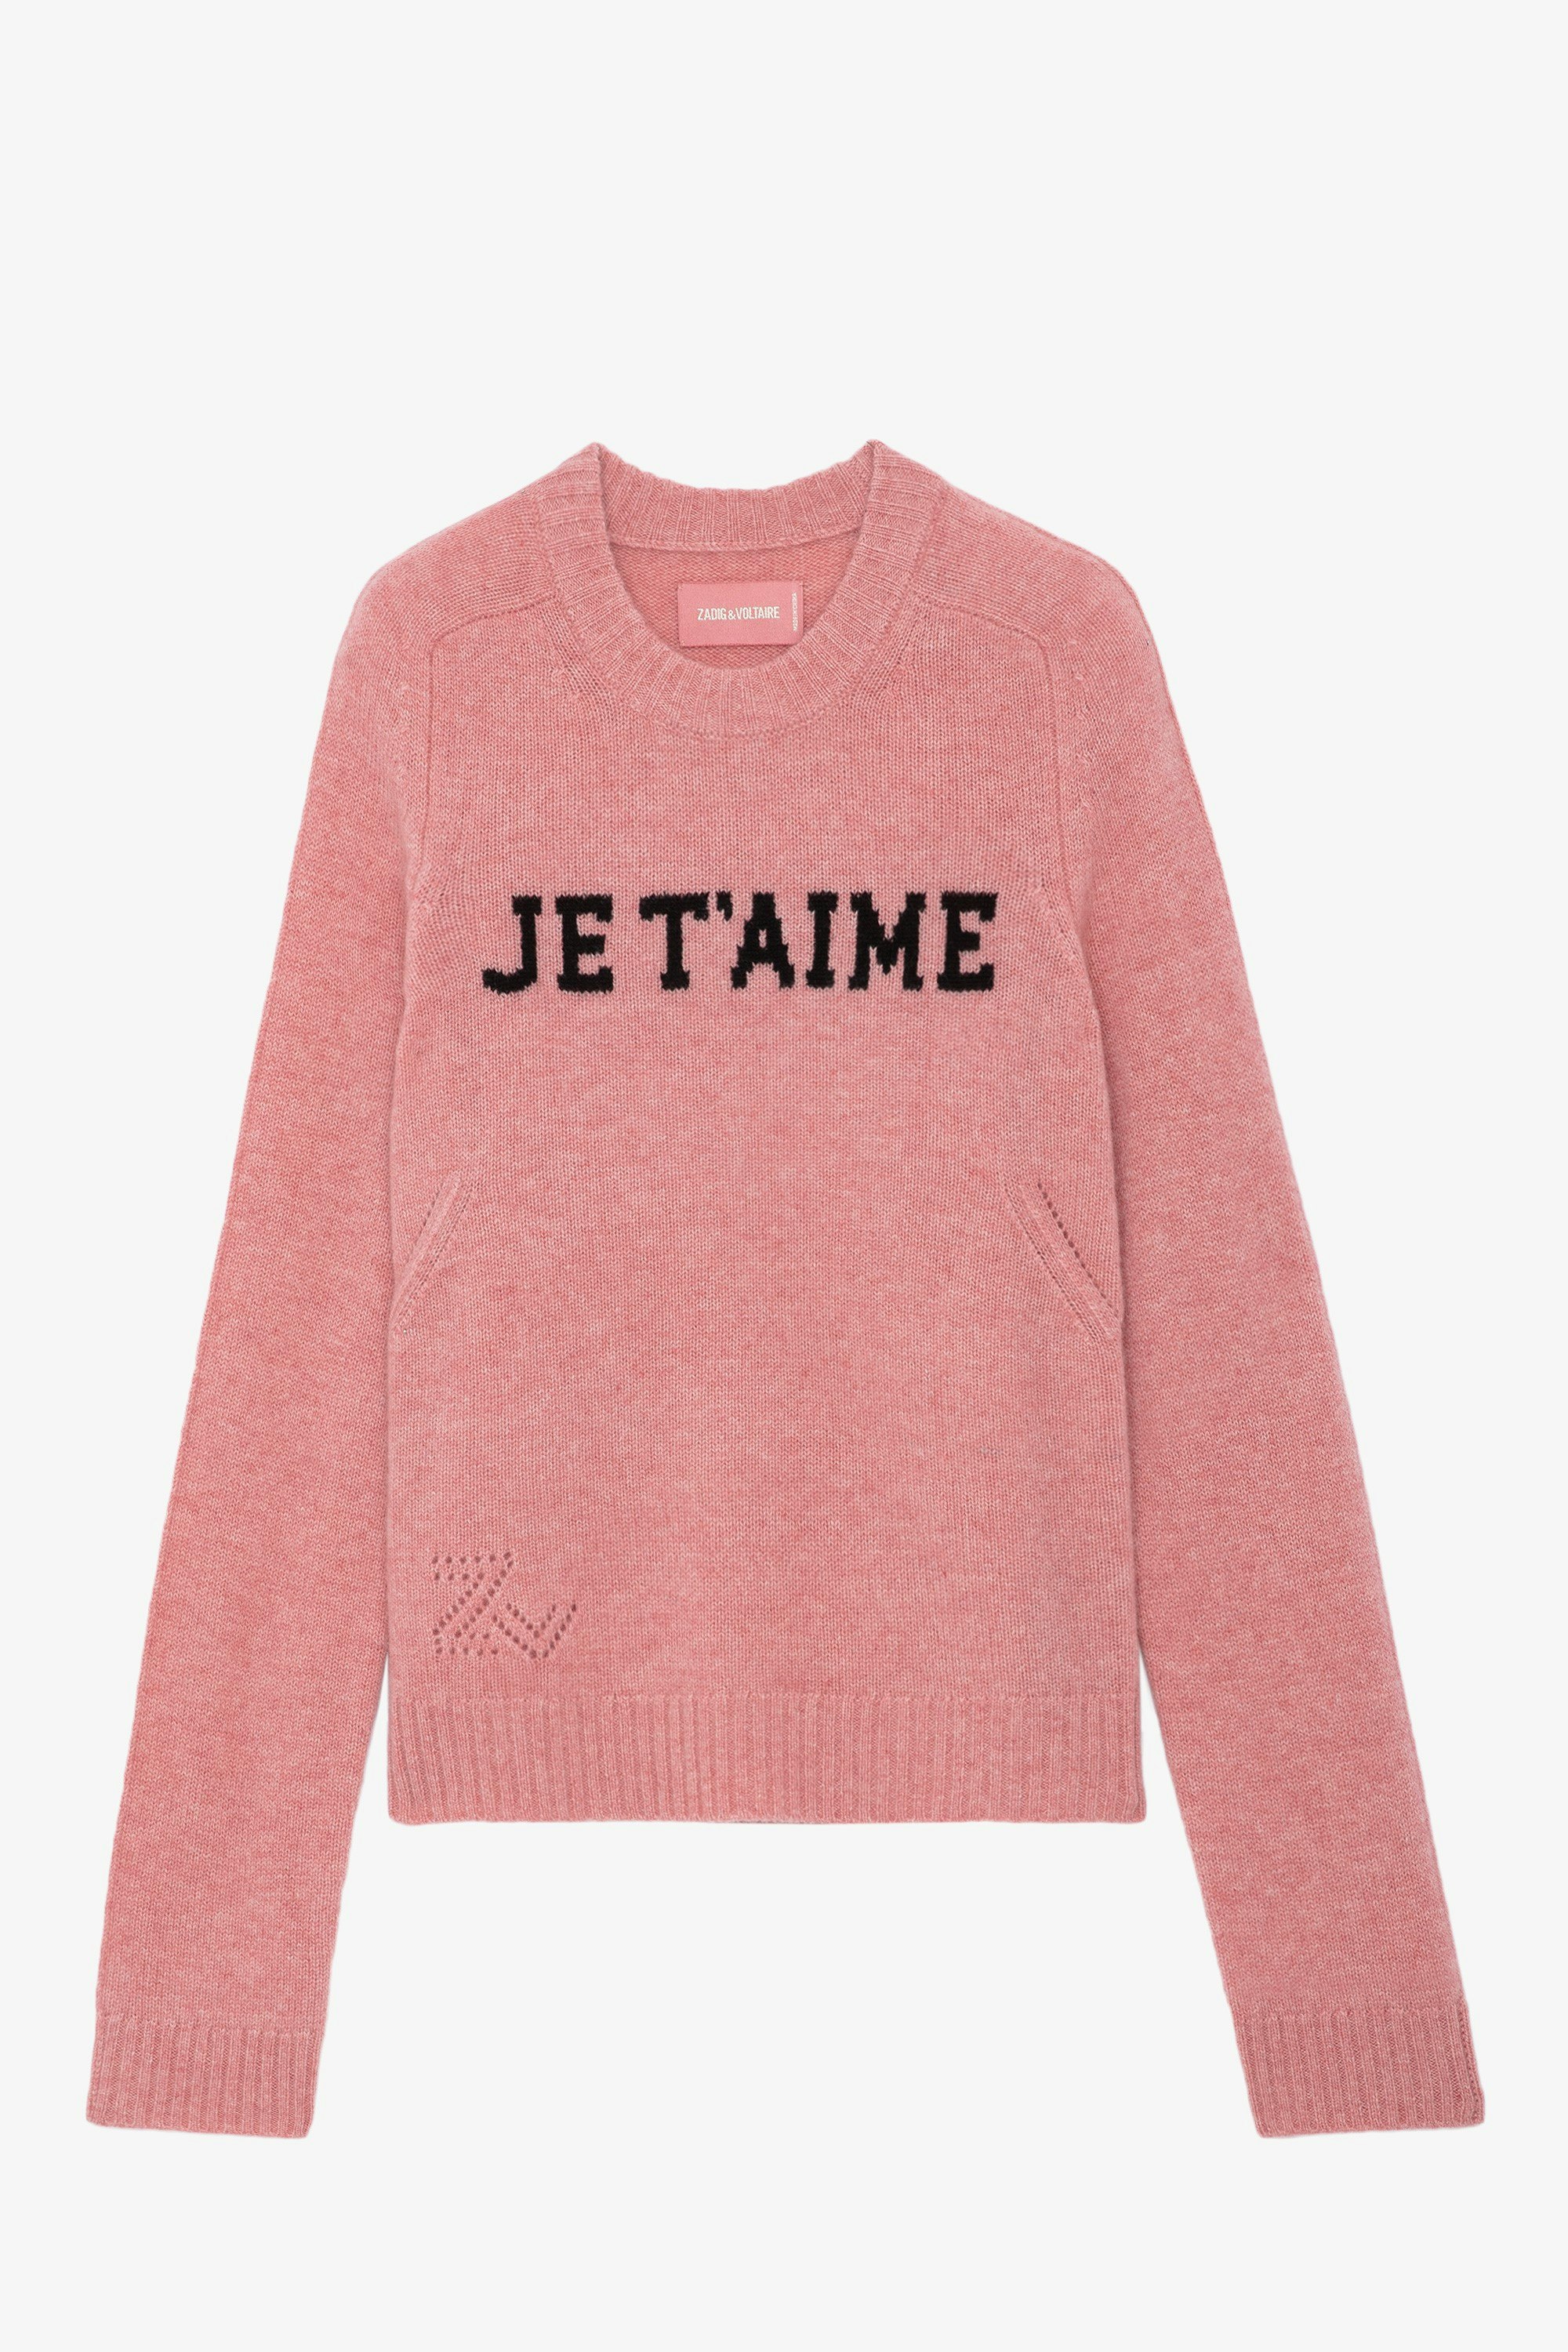 Lili Cashmere Sweater - Women’s pink cashmere sweater with "Je T'aime" slogan on front.